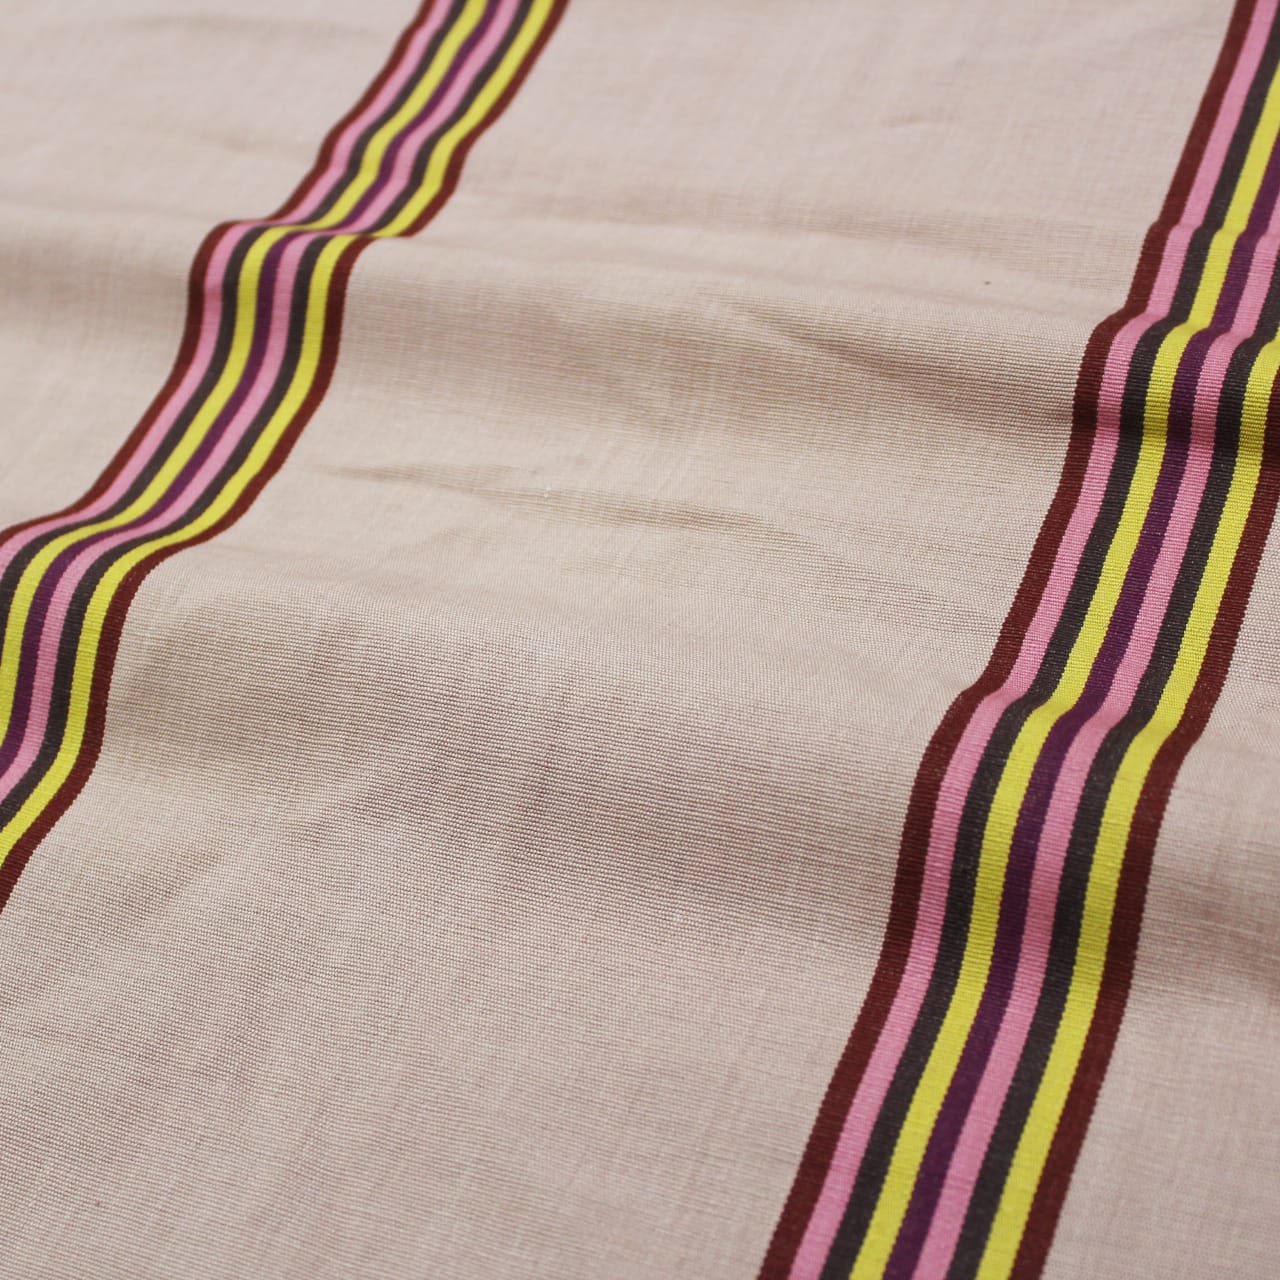 ALPHA Woven Cotton Stripes 1 Pc Table Cover - ROSE